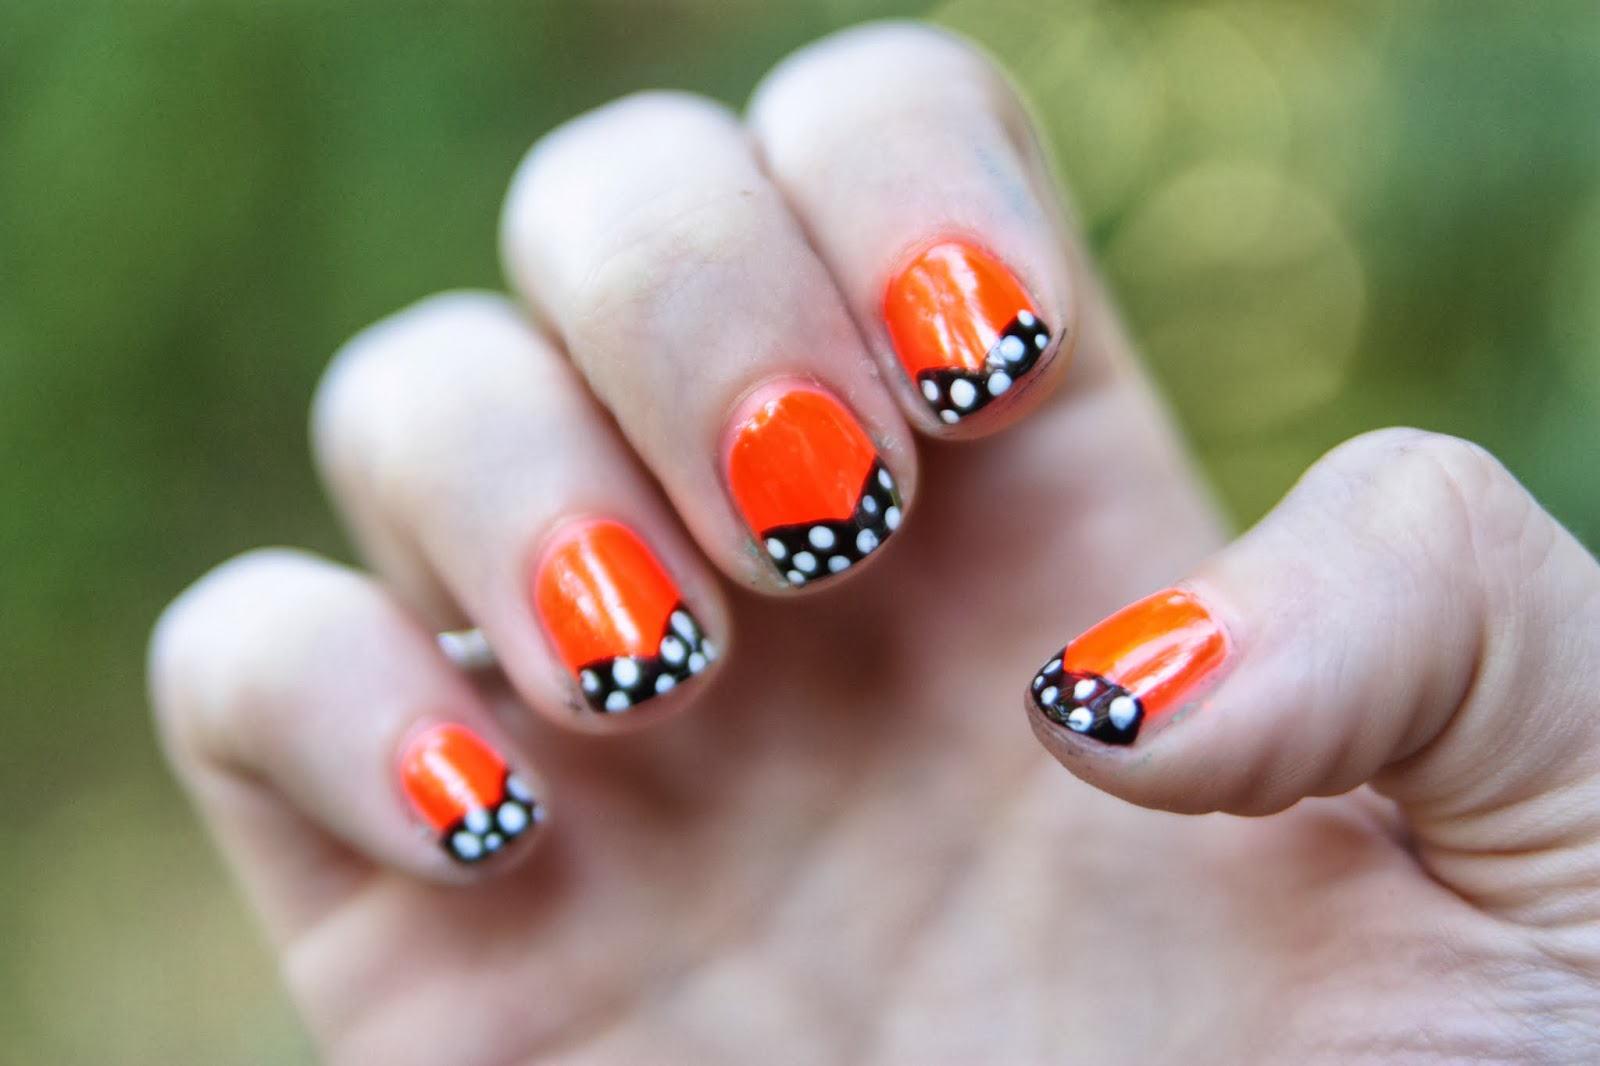 2. Cute Nail Designs for Teenagers - wide 10